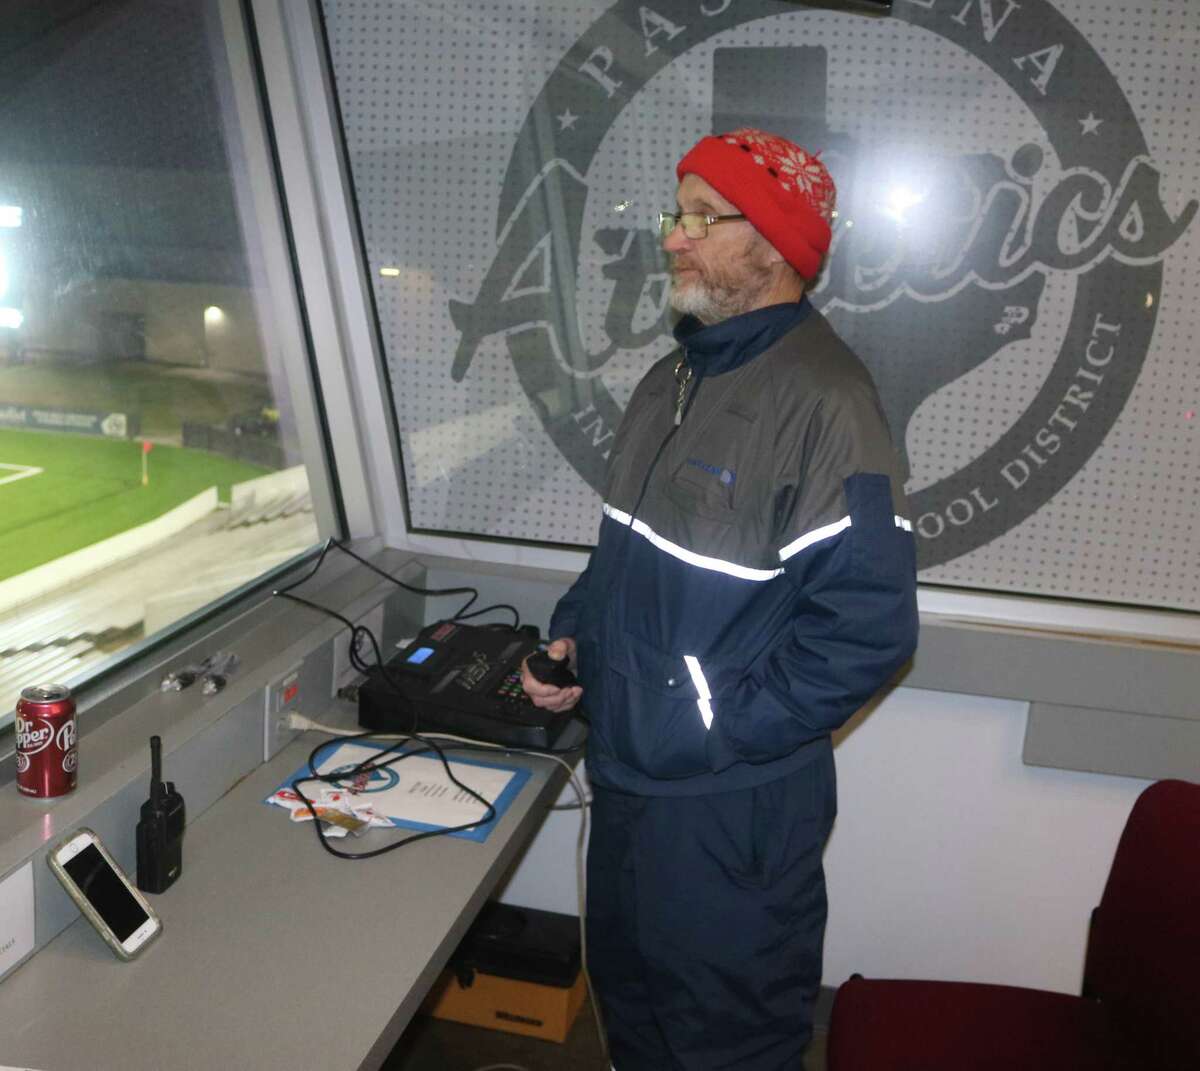 J.W. Smith, shown operating the scoreboard clock during a recent soccer match, has been named the recipient of Pasadena ISD’s Barry Harris Extra Effort Award.